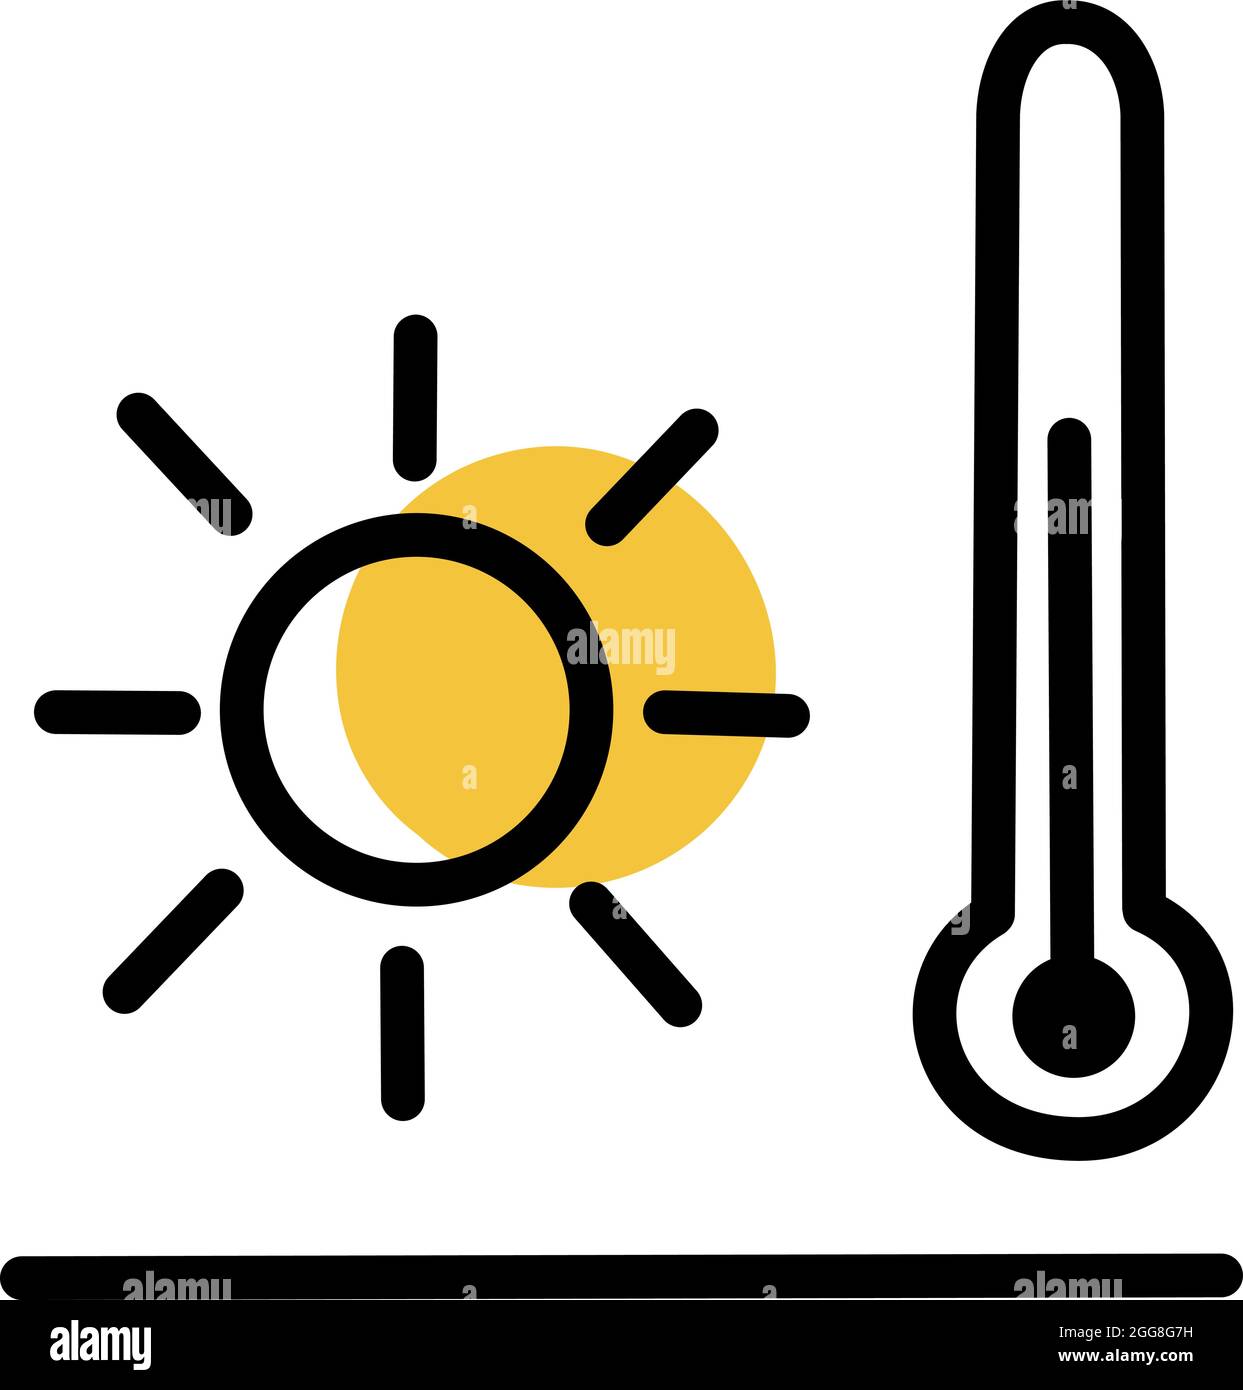 https://c8.alamy.com/comp/2GG8G7H/sun-thermometer-illustration-vector-on-a-white-background-2GG8G7H.jpg